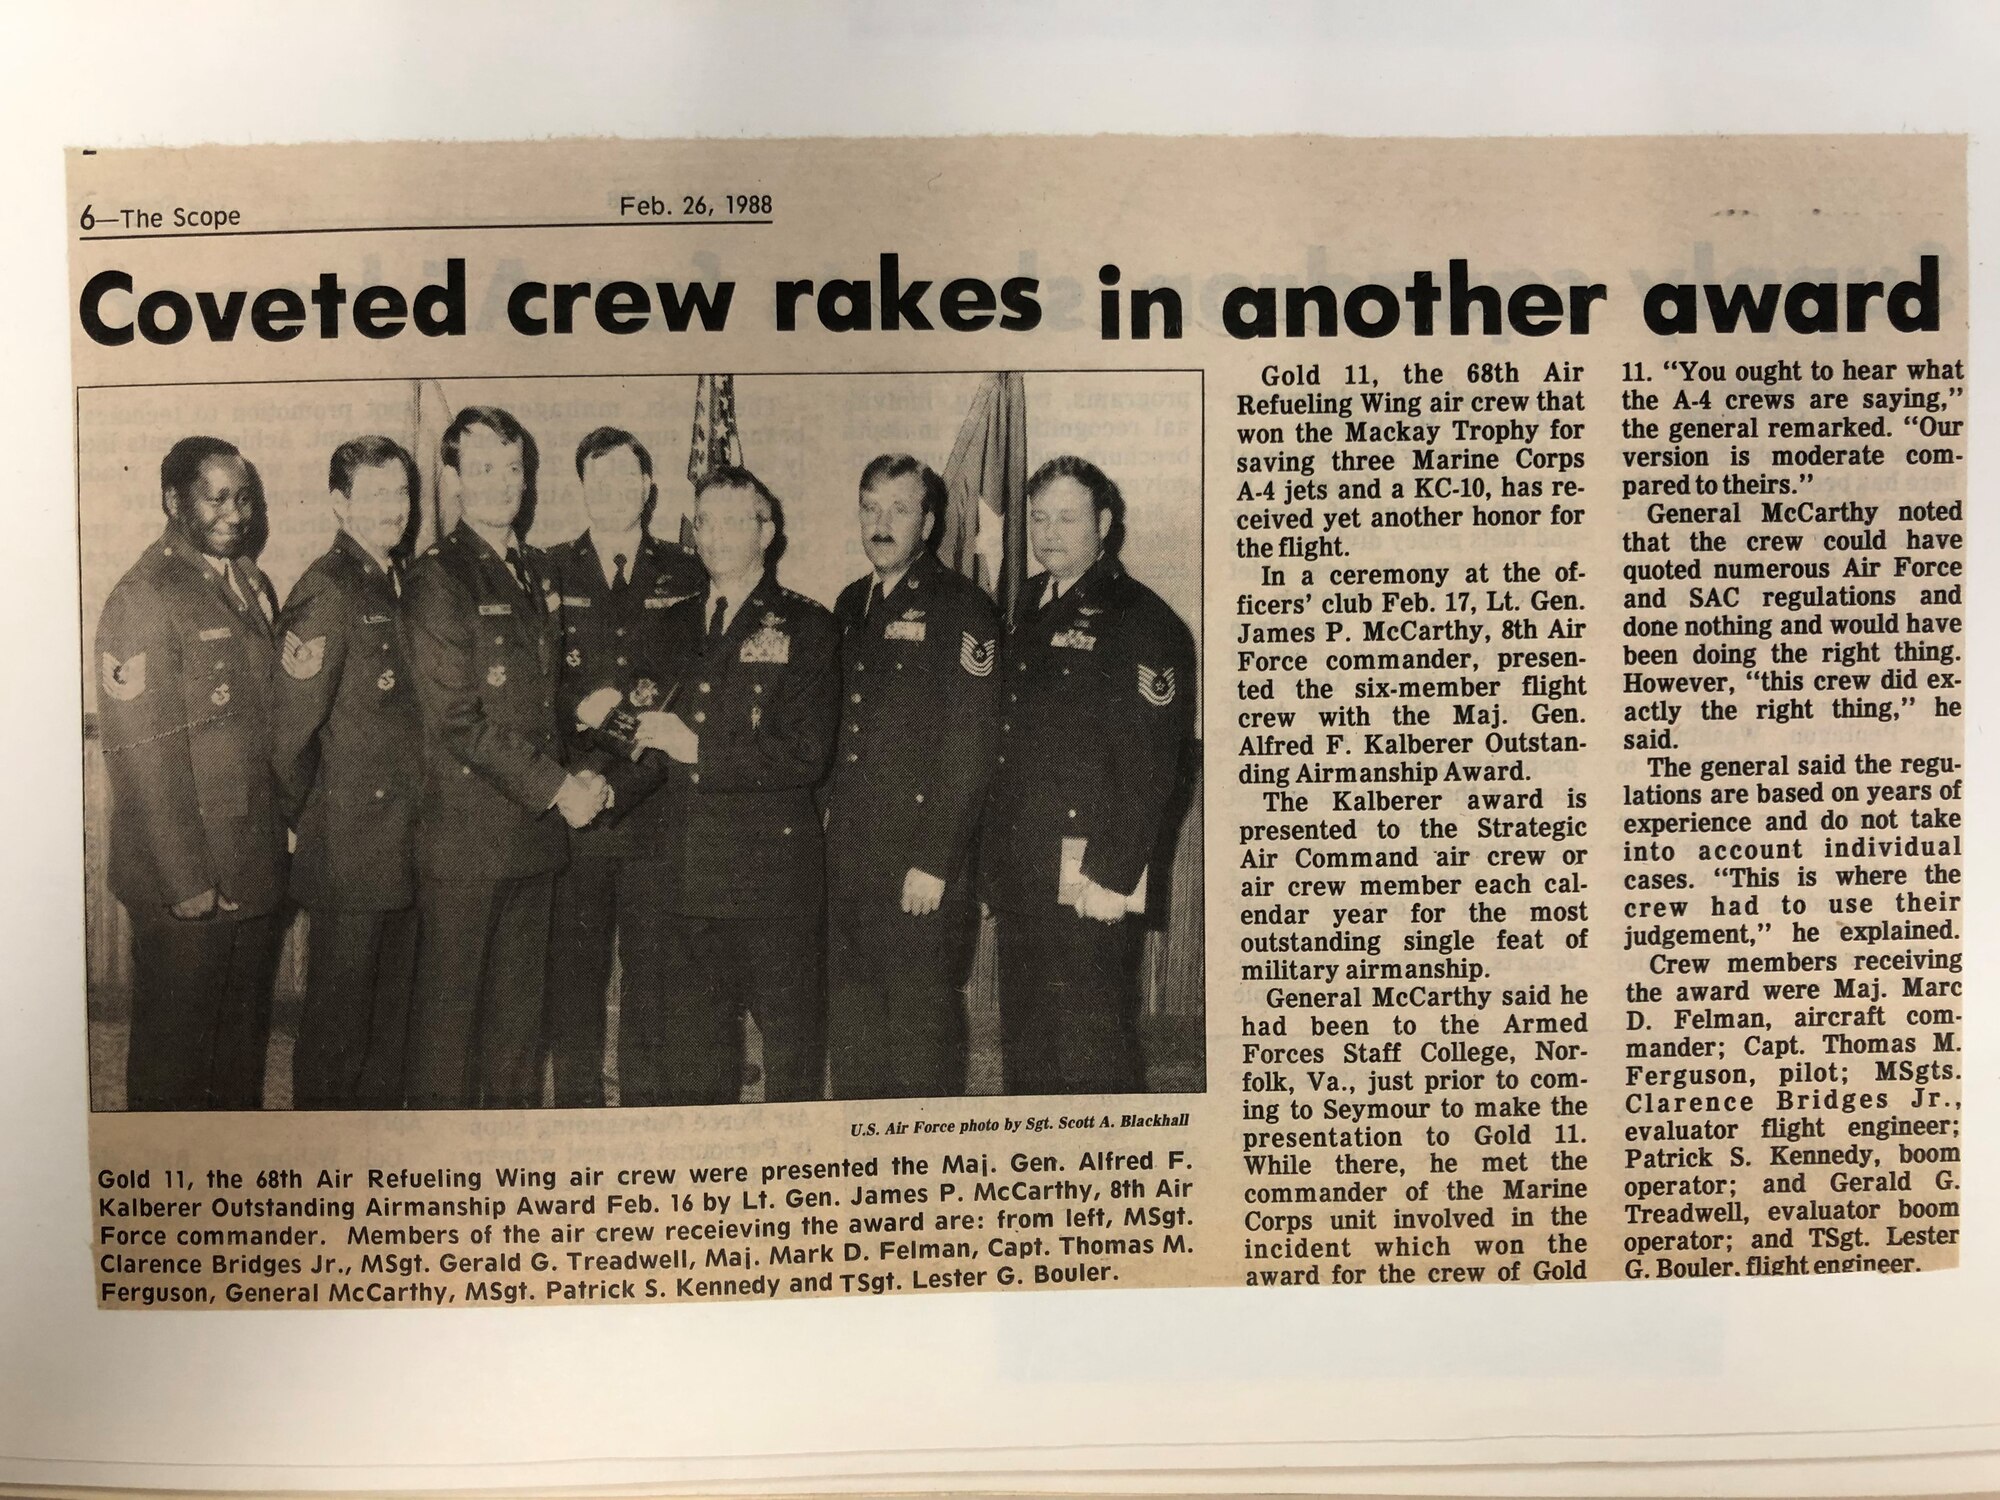 (Newspaper clipping
courtesy of the 916th Air Refueling Wing Historian)